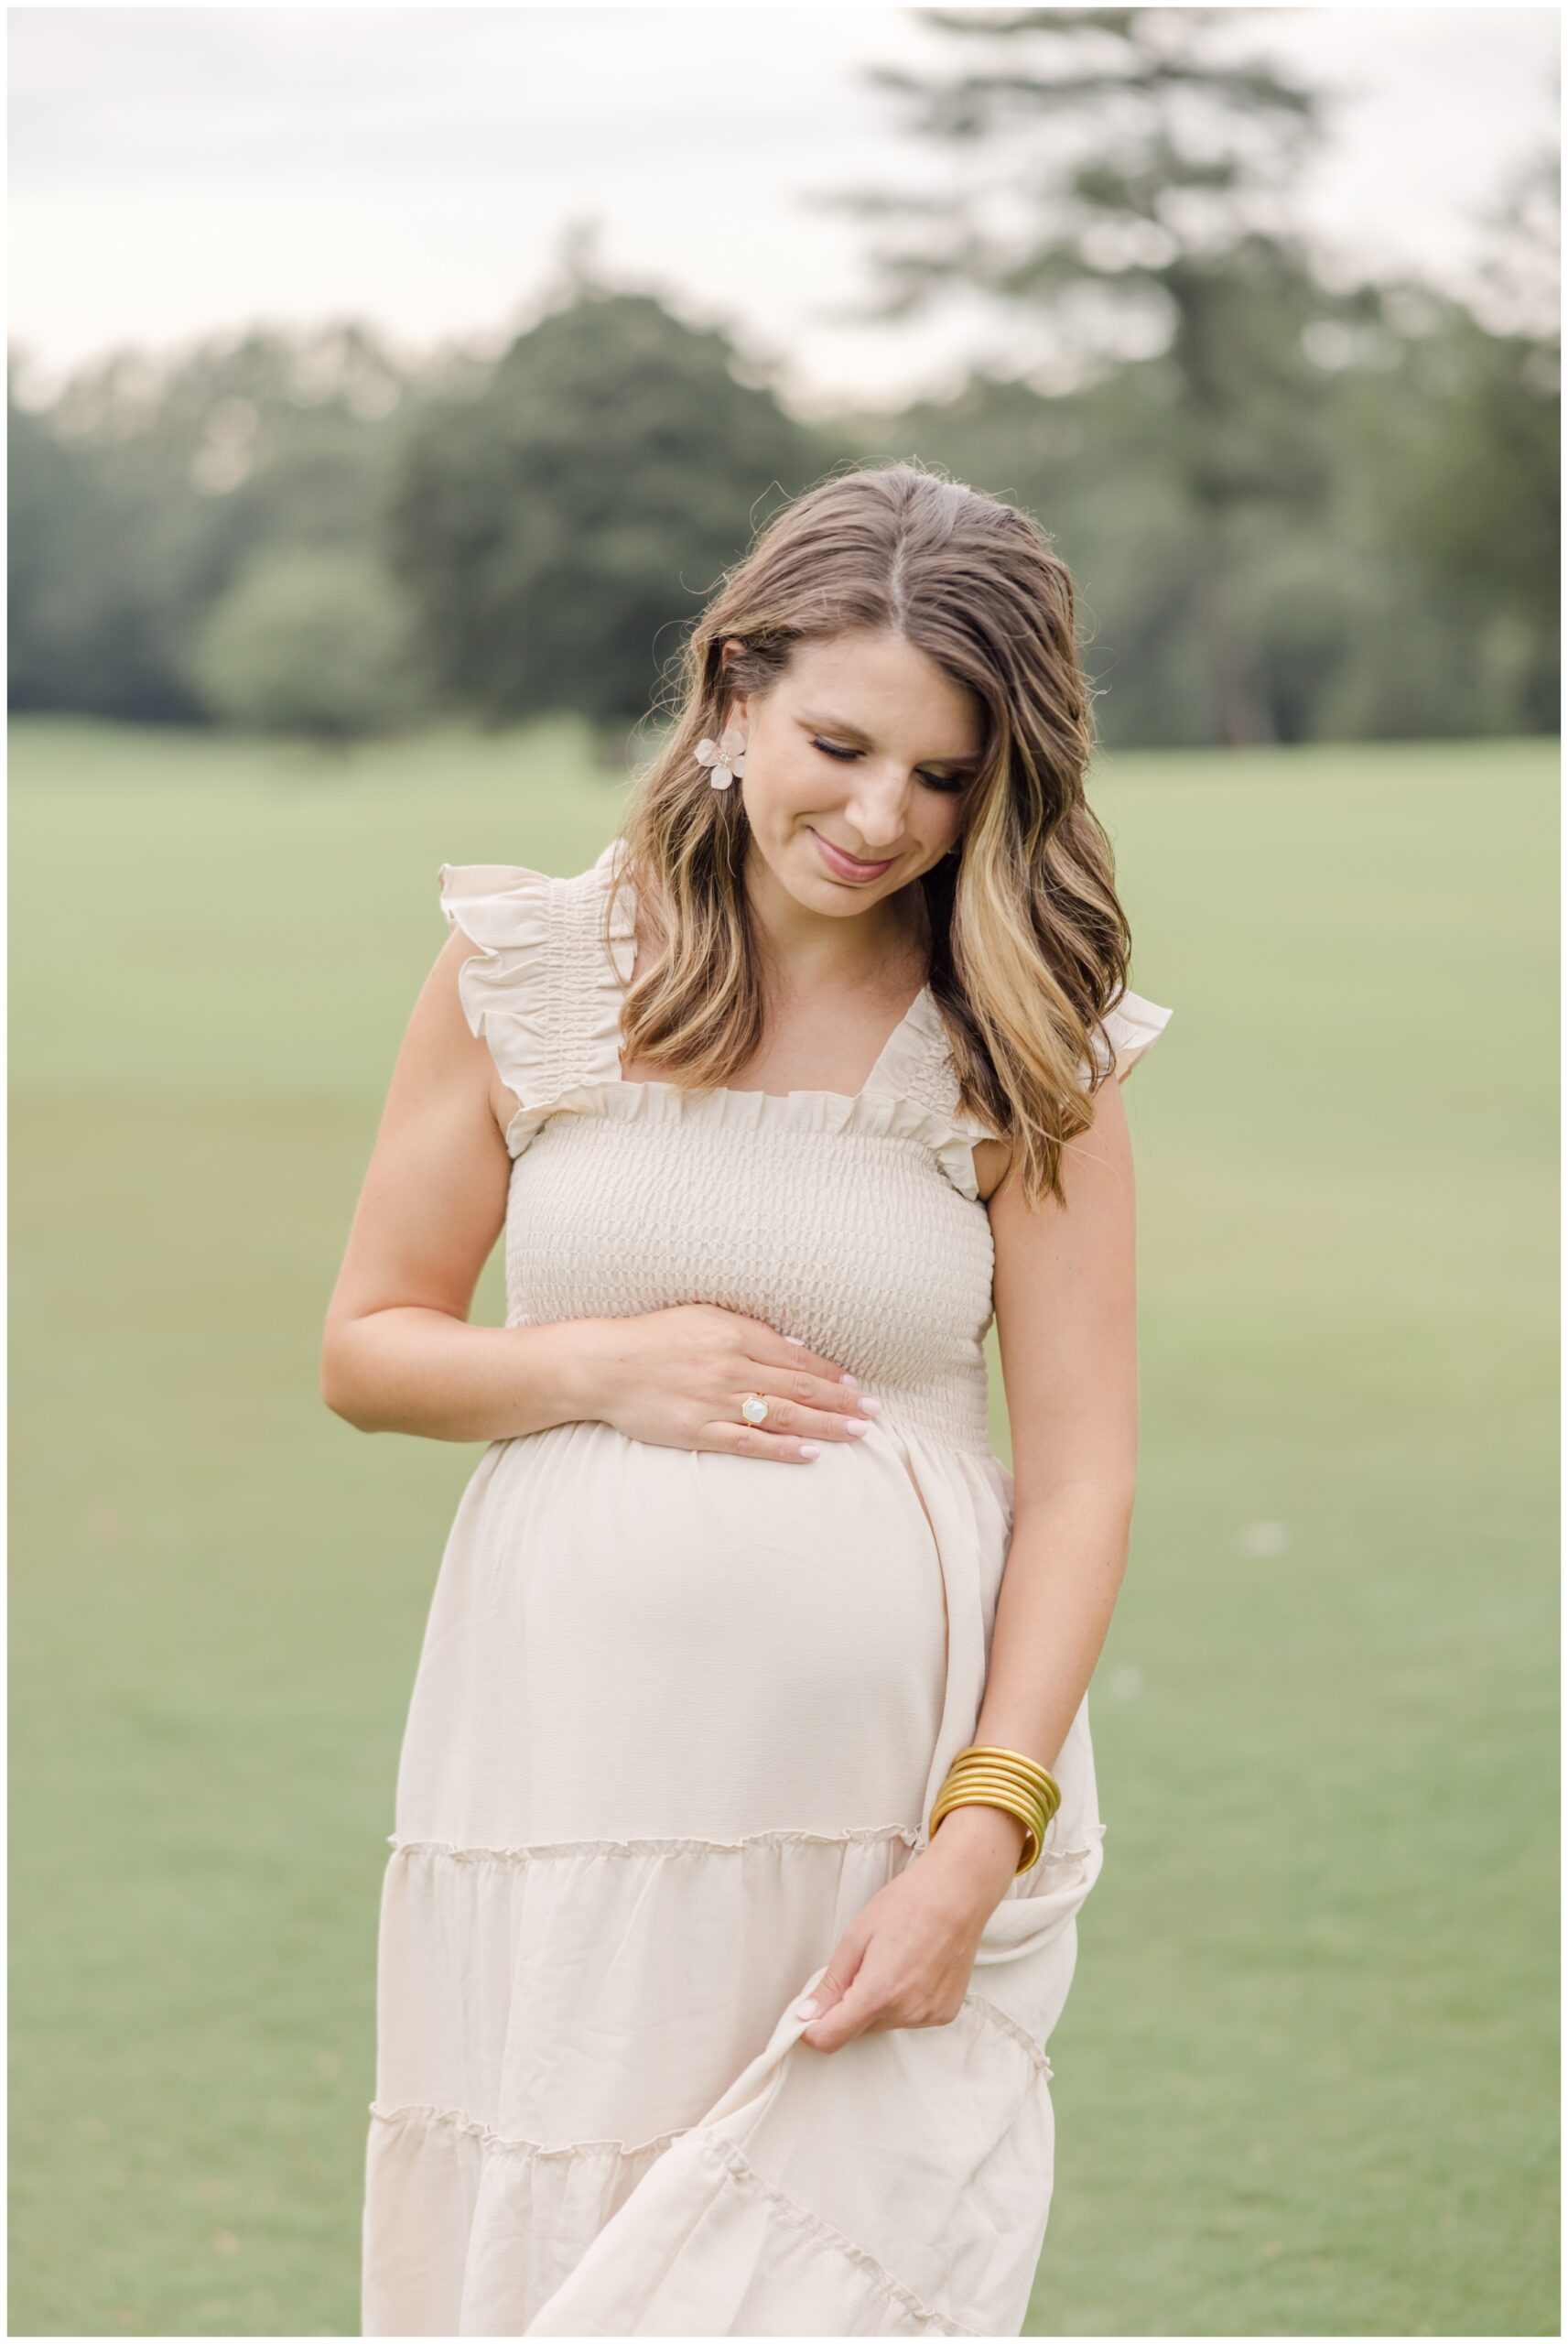 Pregnant mother smiling softly while cradling her baby bump during Greenville SC maternity photos.